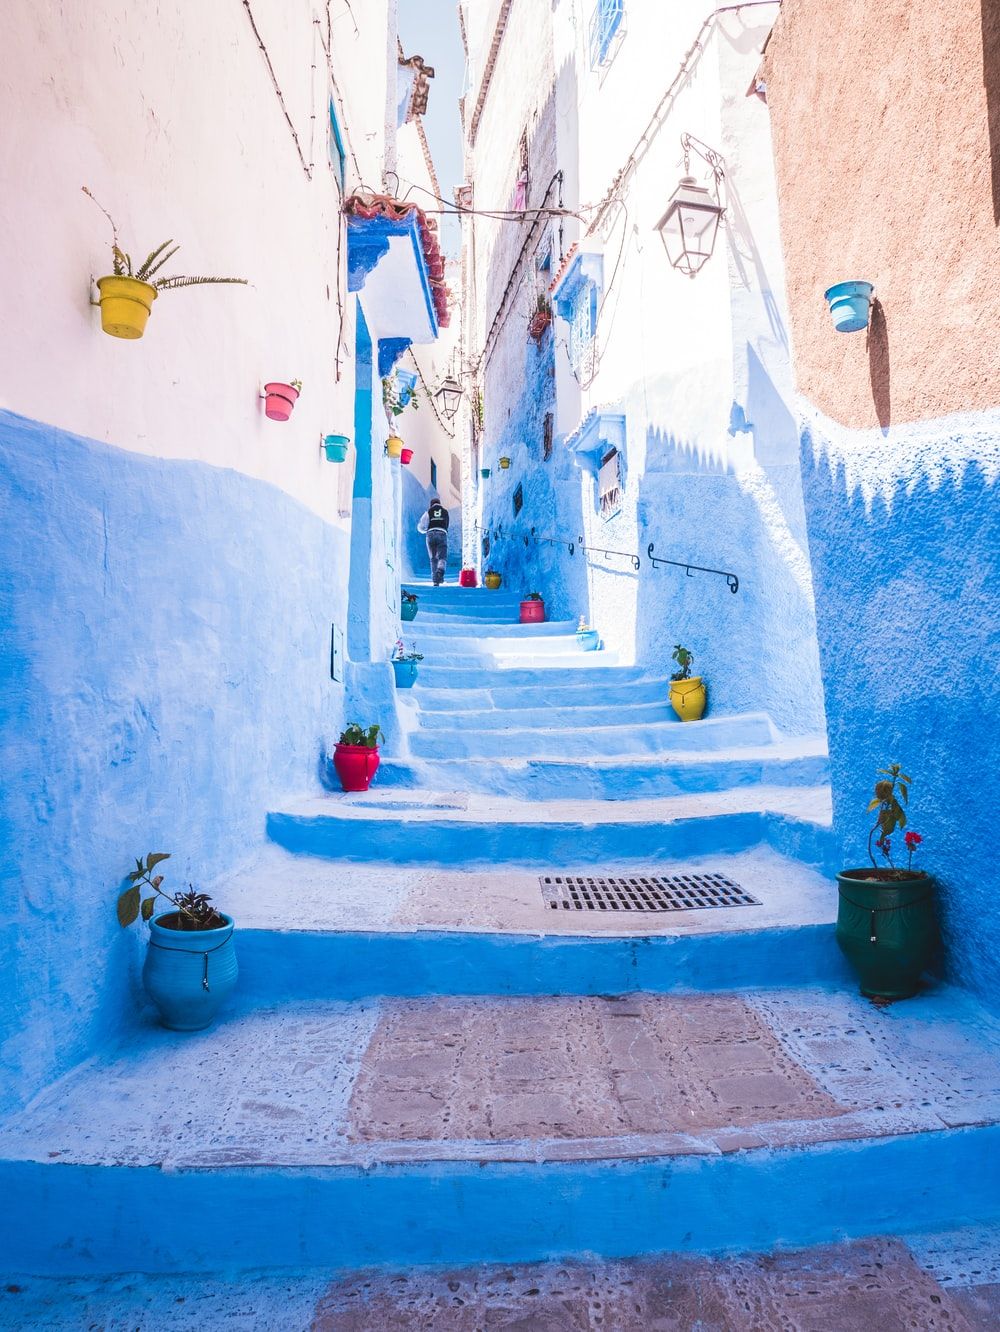 Morocco Picture [Stunning]. Download Free Image